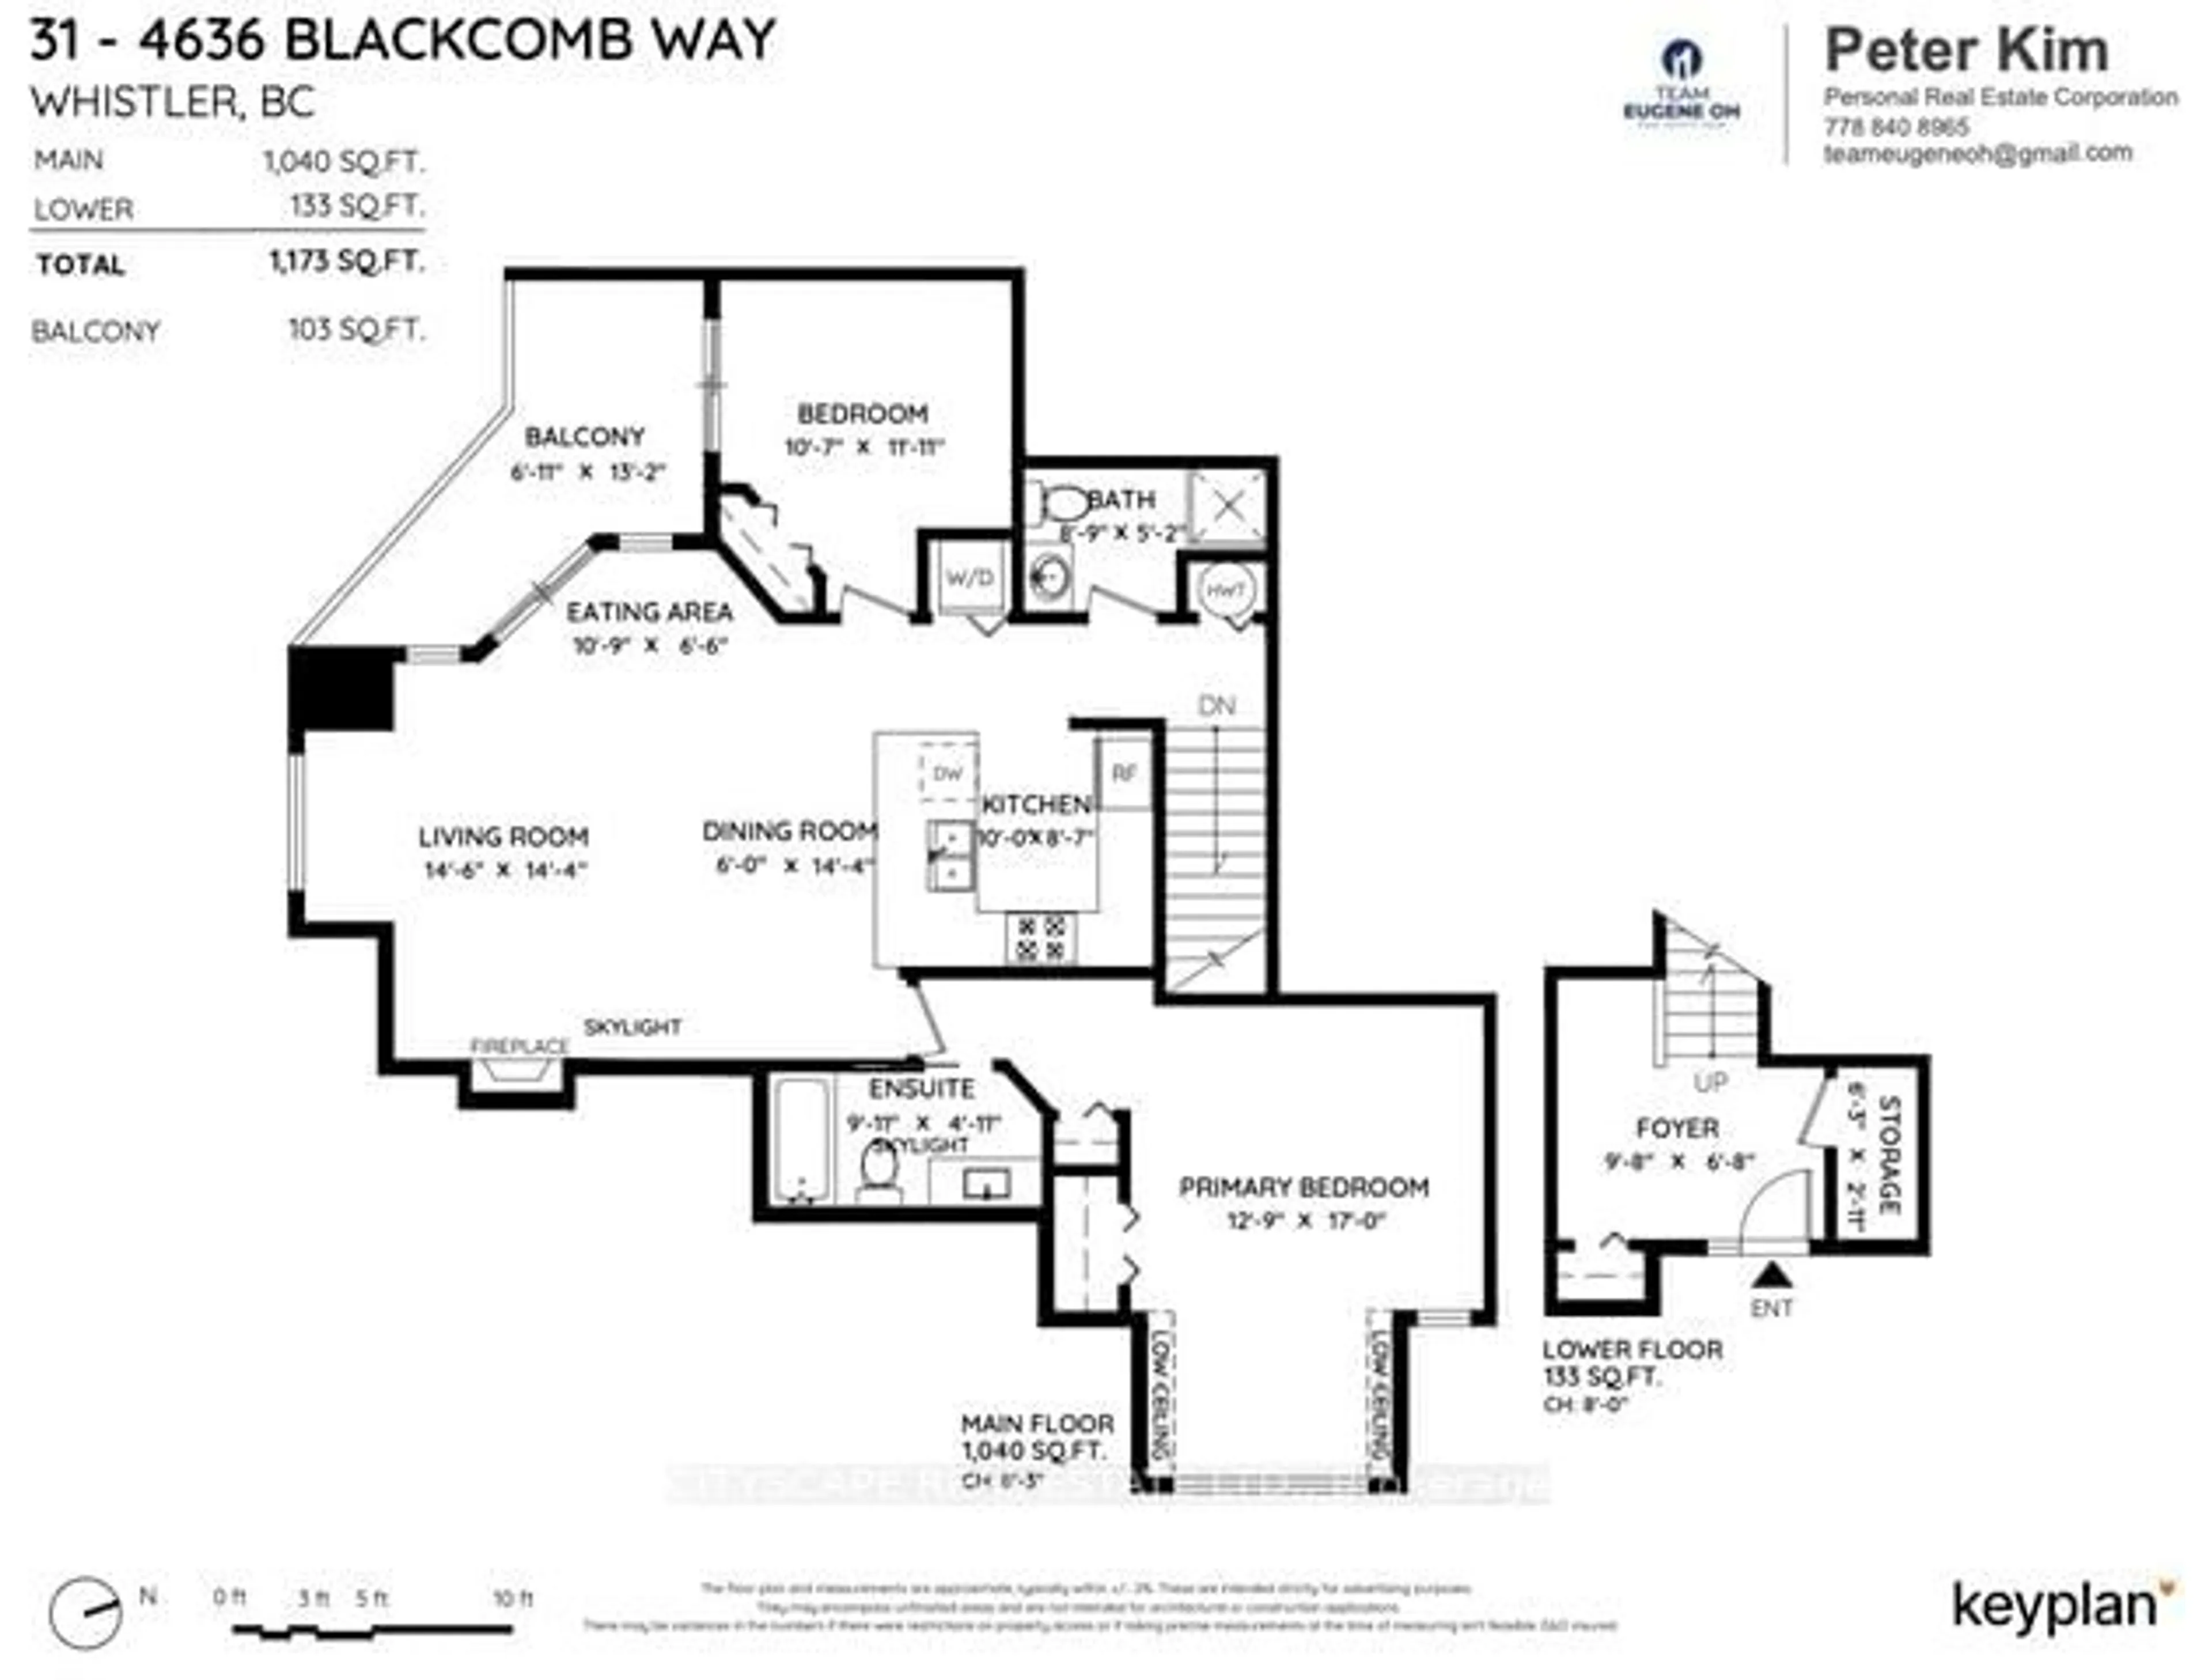 Floor plan for 4636 Blackcomb Way #31, Out of Area British Columbia V8E 0H2